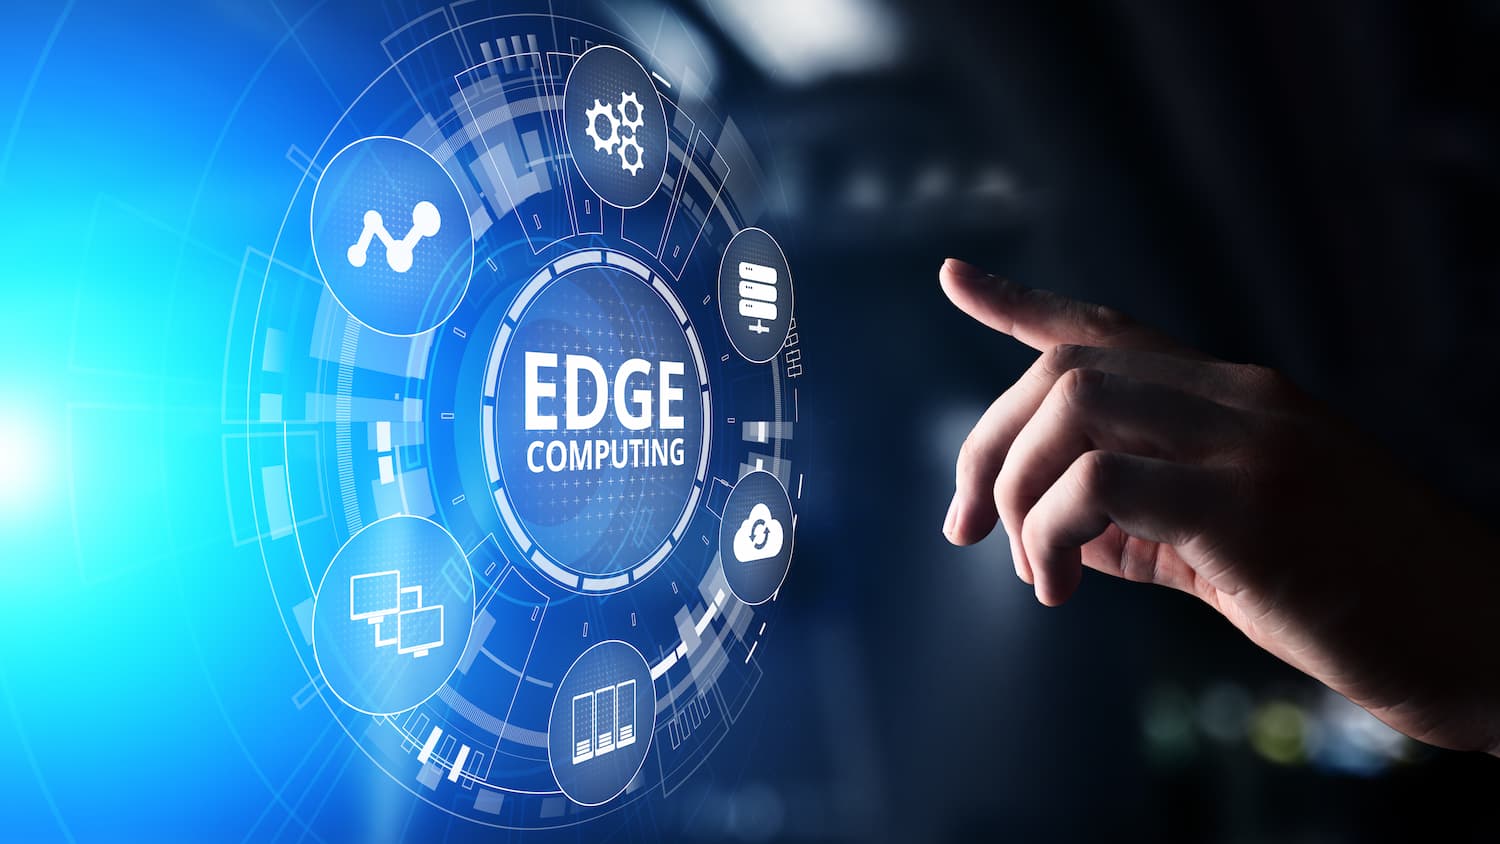 Featured image for post: Utilizing Edge Computing for Real-Time Marketing Insights